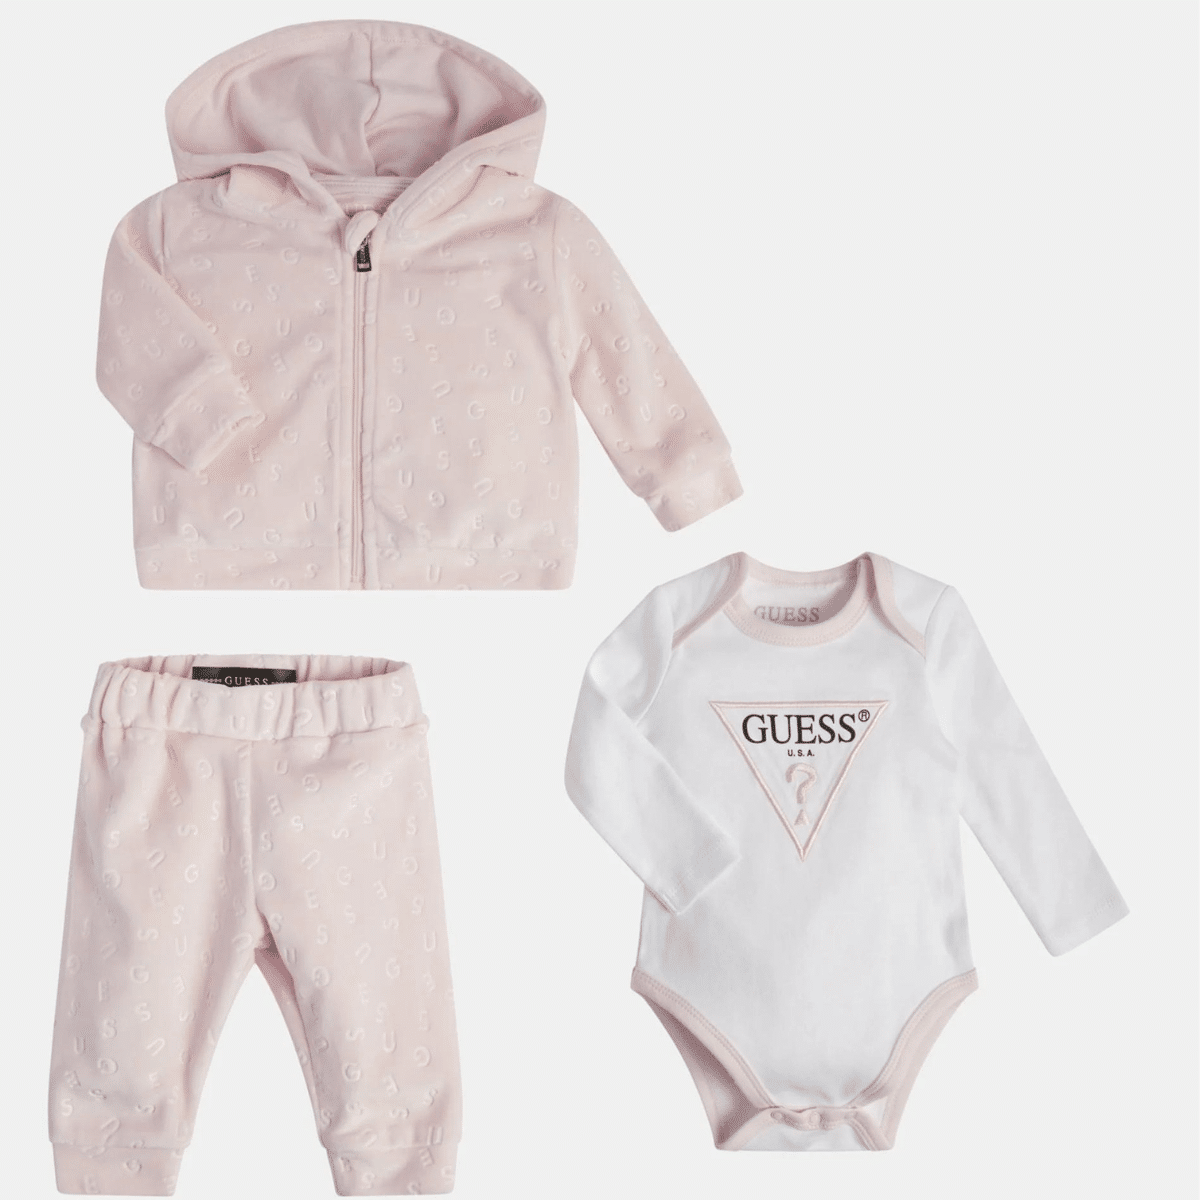 Guess girls pale pink take me home set outfit